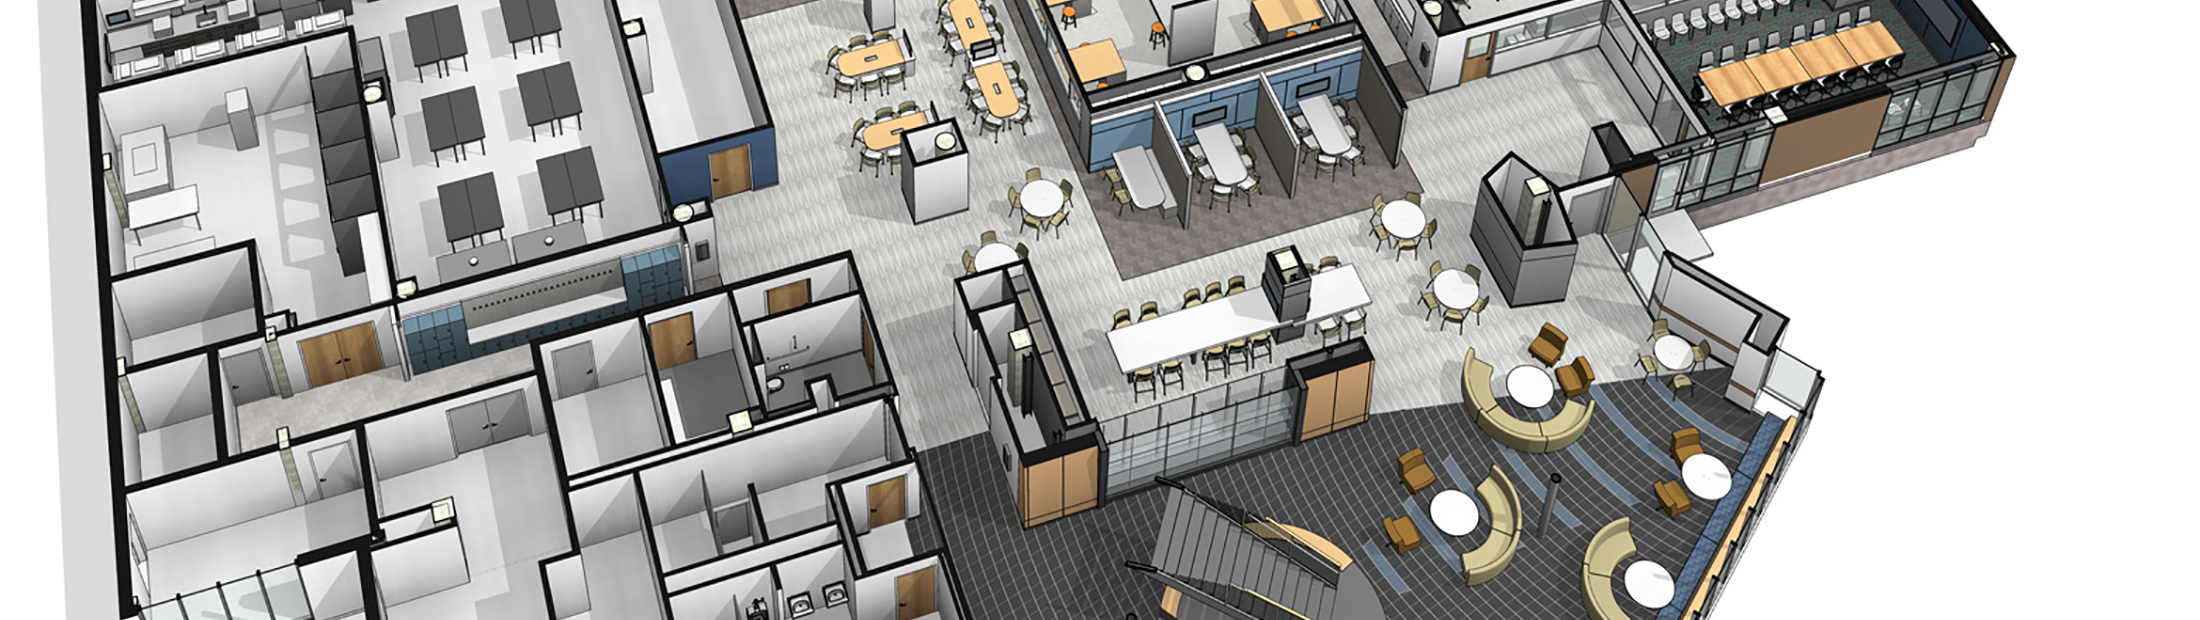 A 3D render of the overhead view of the planned design space renovation for Biomedical Building